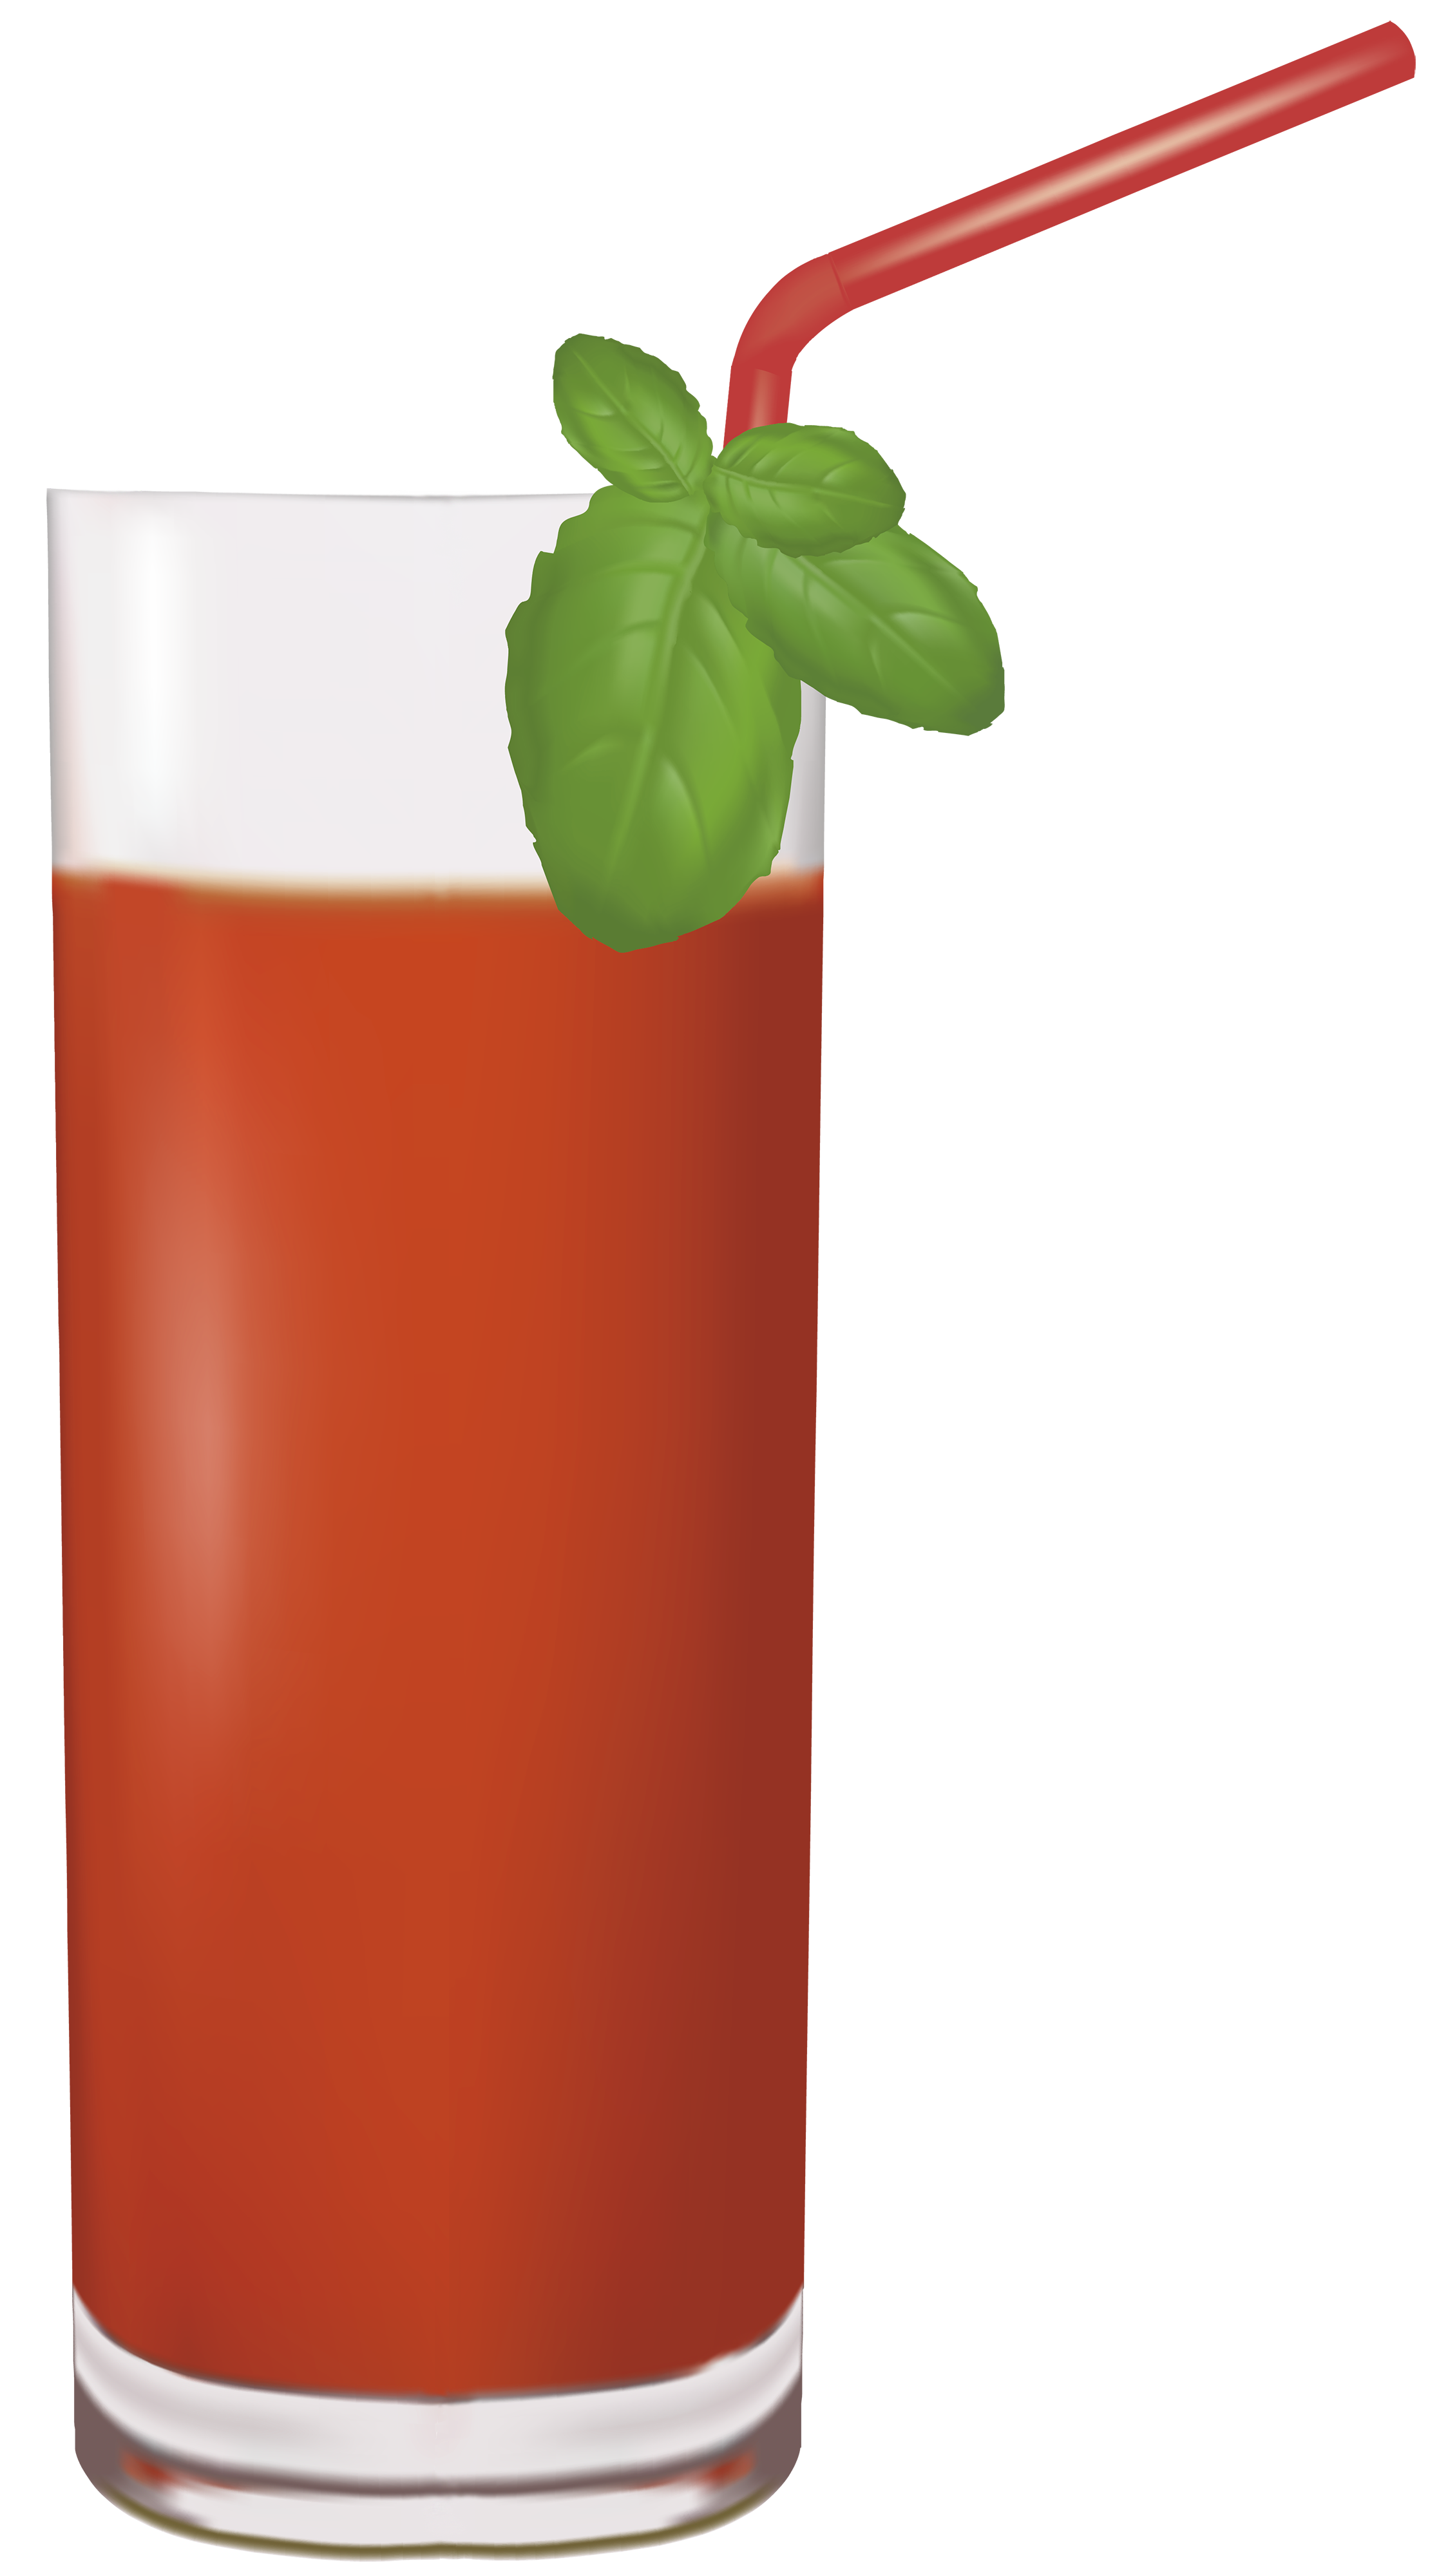 bloody mary clipart - photo #6